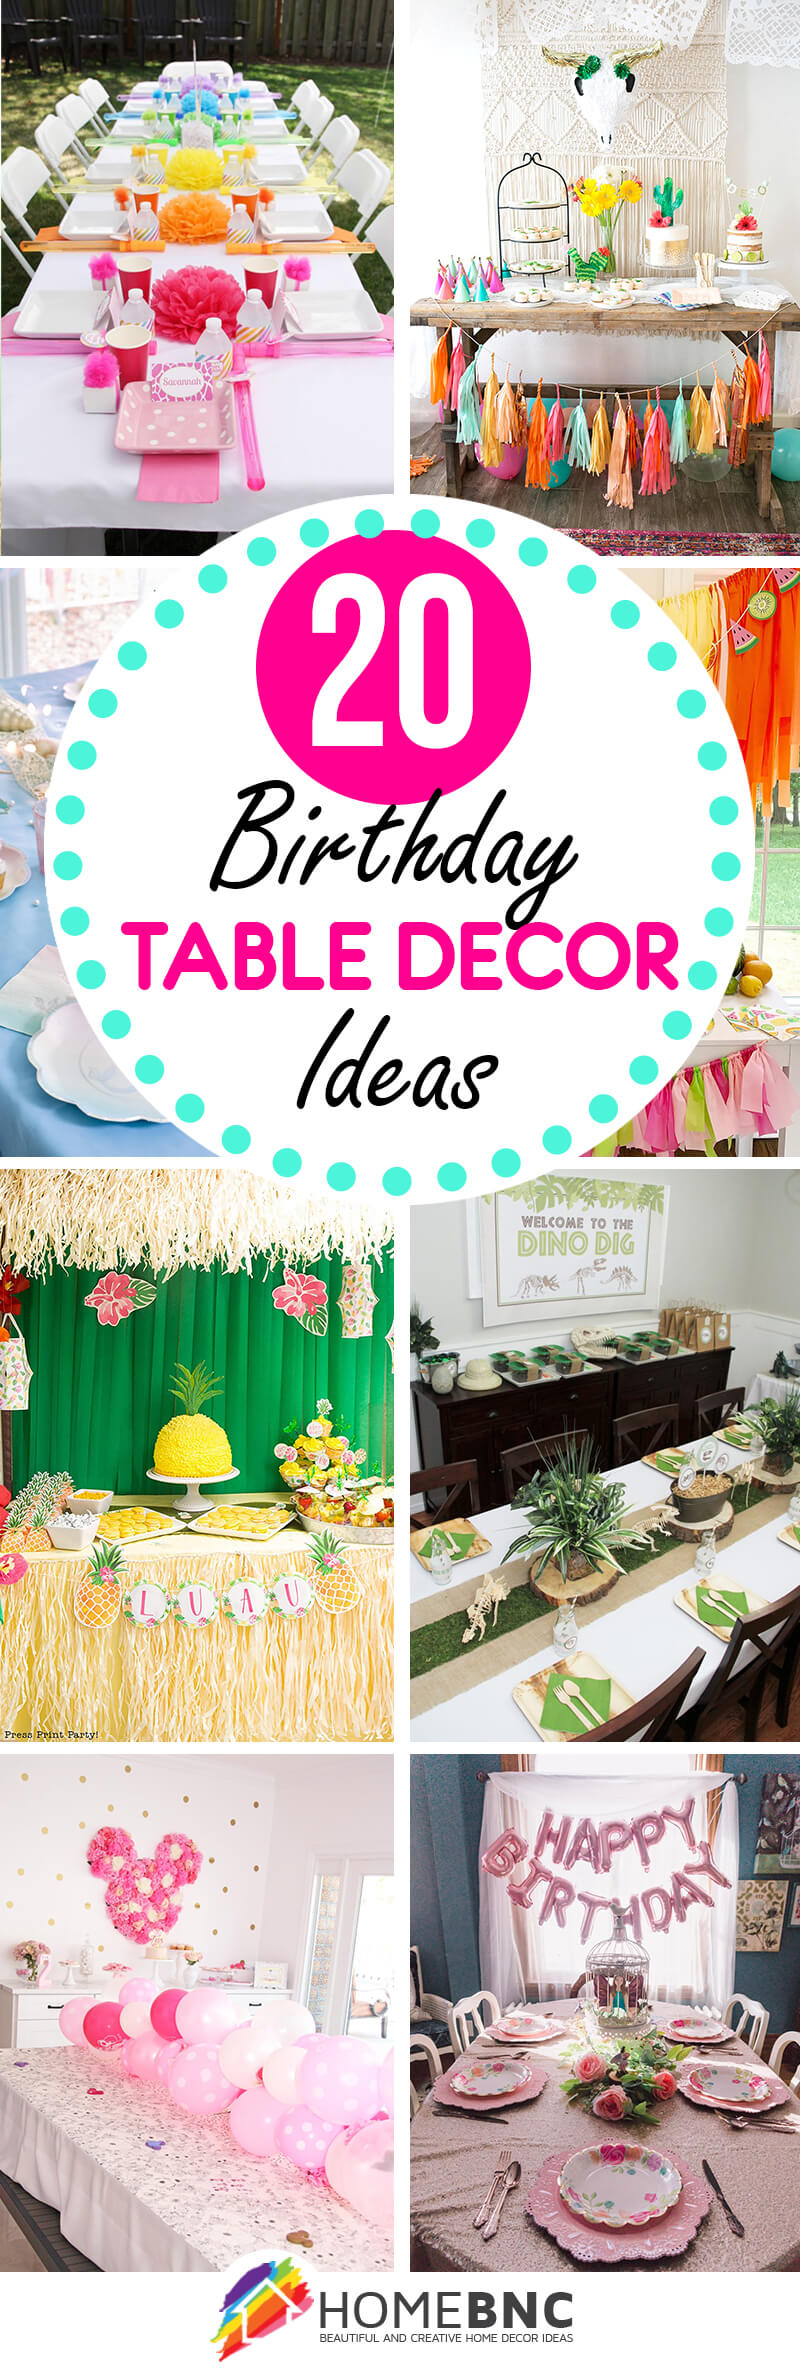 Birthday Party Decorations Items Set all in one